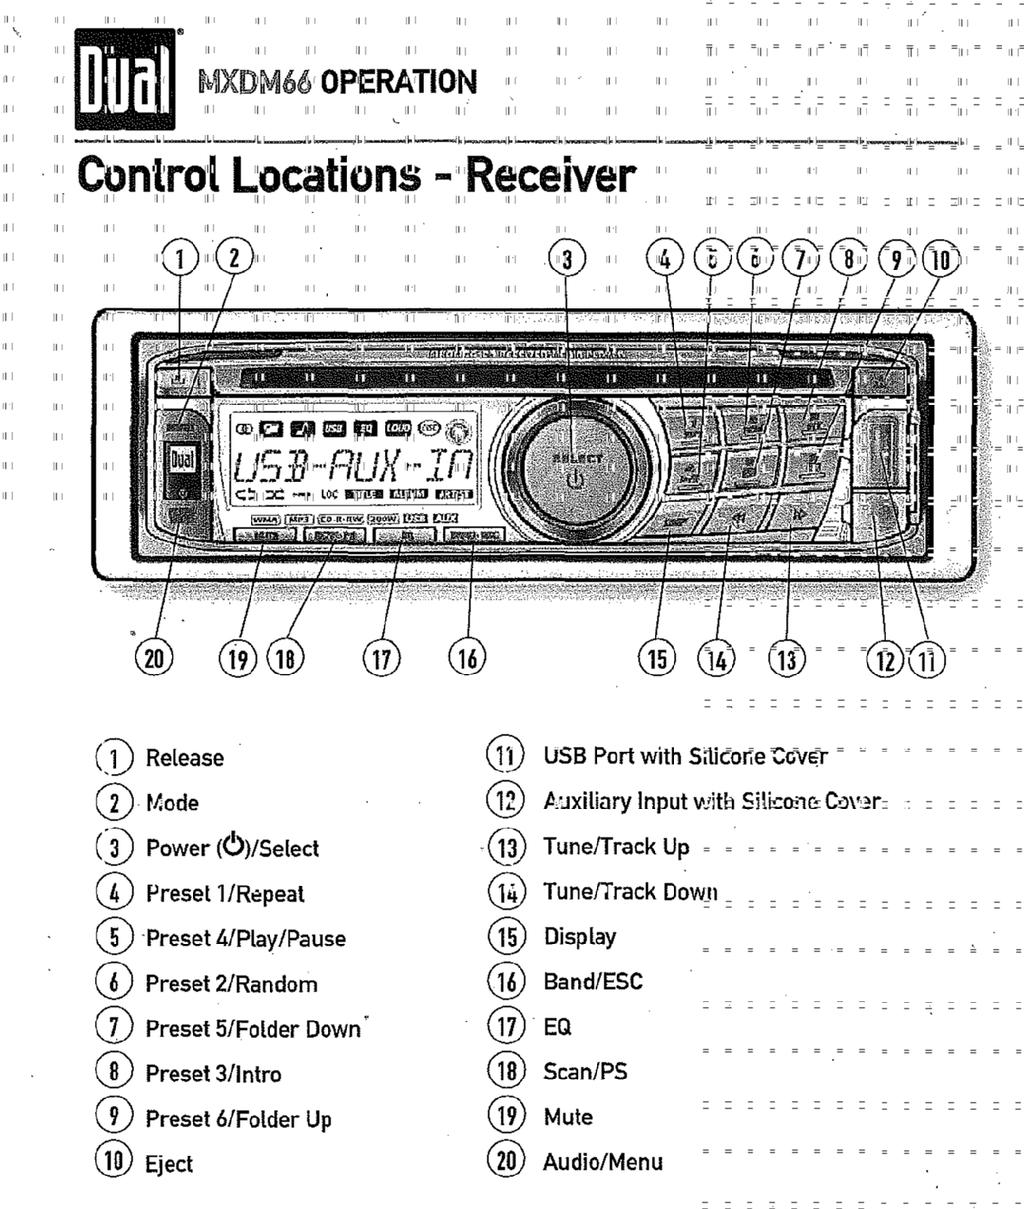 AM-FM Stereo Radio Compact Disc Player The Stereo system is wired directly to the batteries and is not controlled by any switches on the DC control panel.